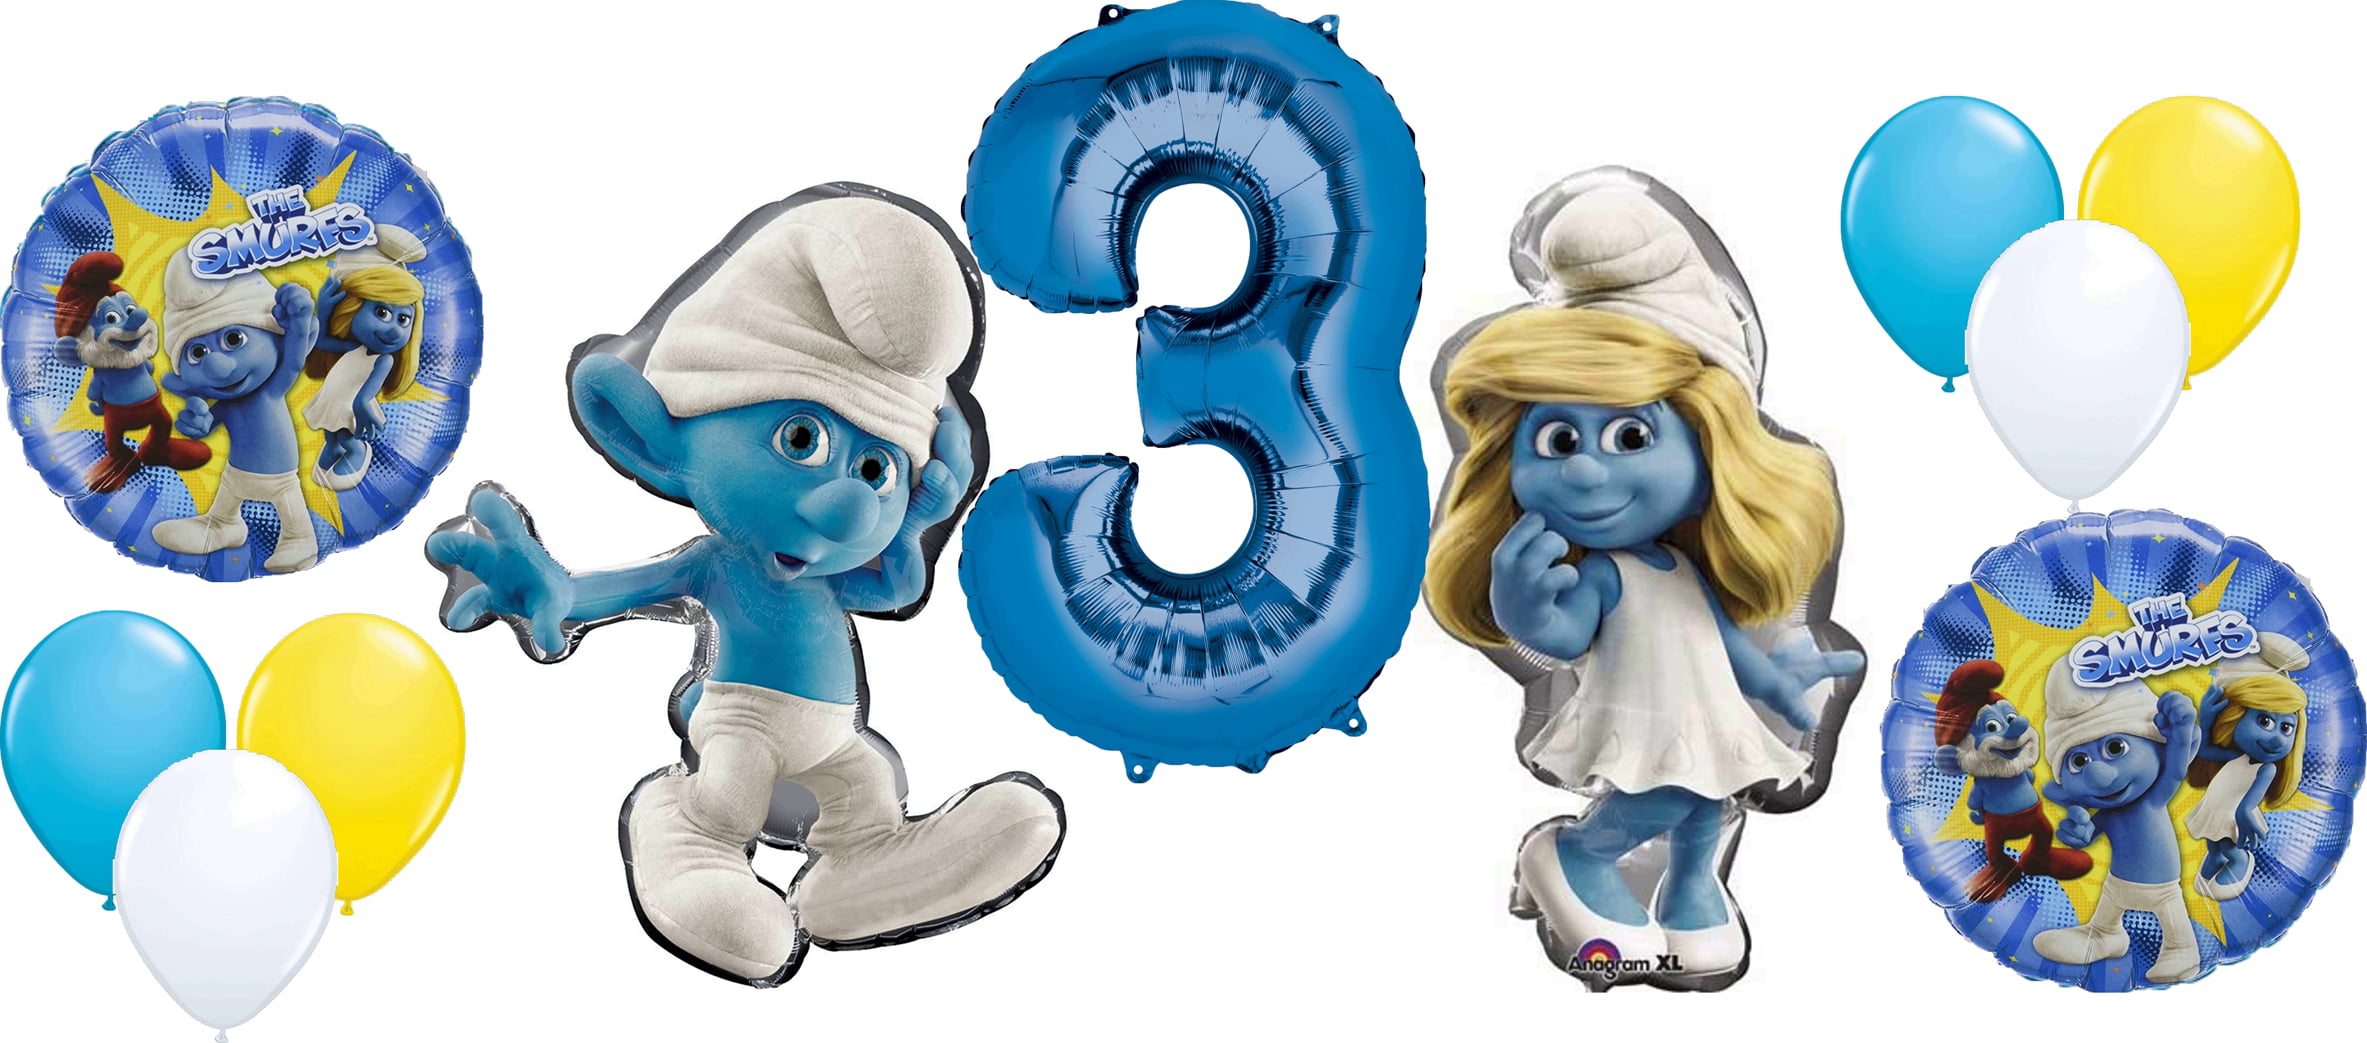 NEW  IN PACKAGE SMURFS  3 MINI CENTERPIECE PARTY SUPPLIES